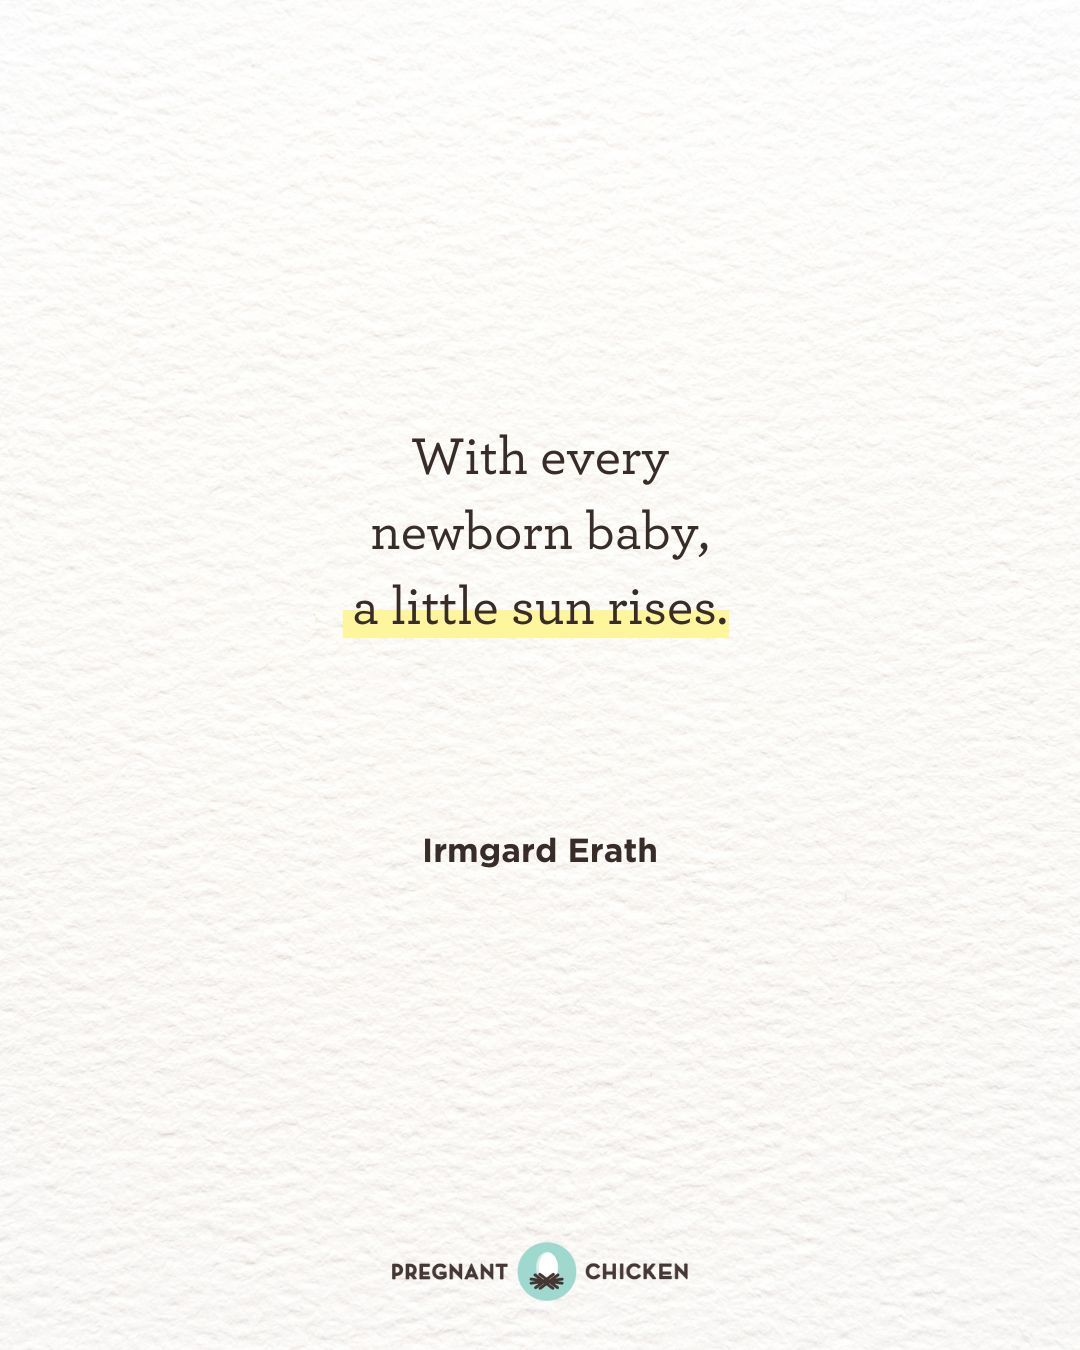 With every newborn baby, a little sun rises.